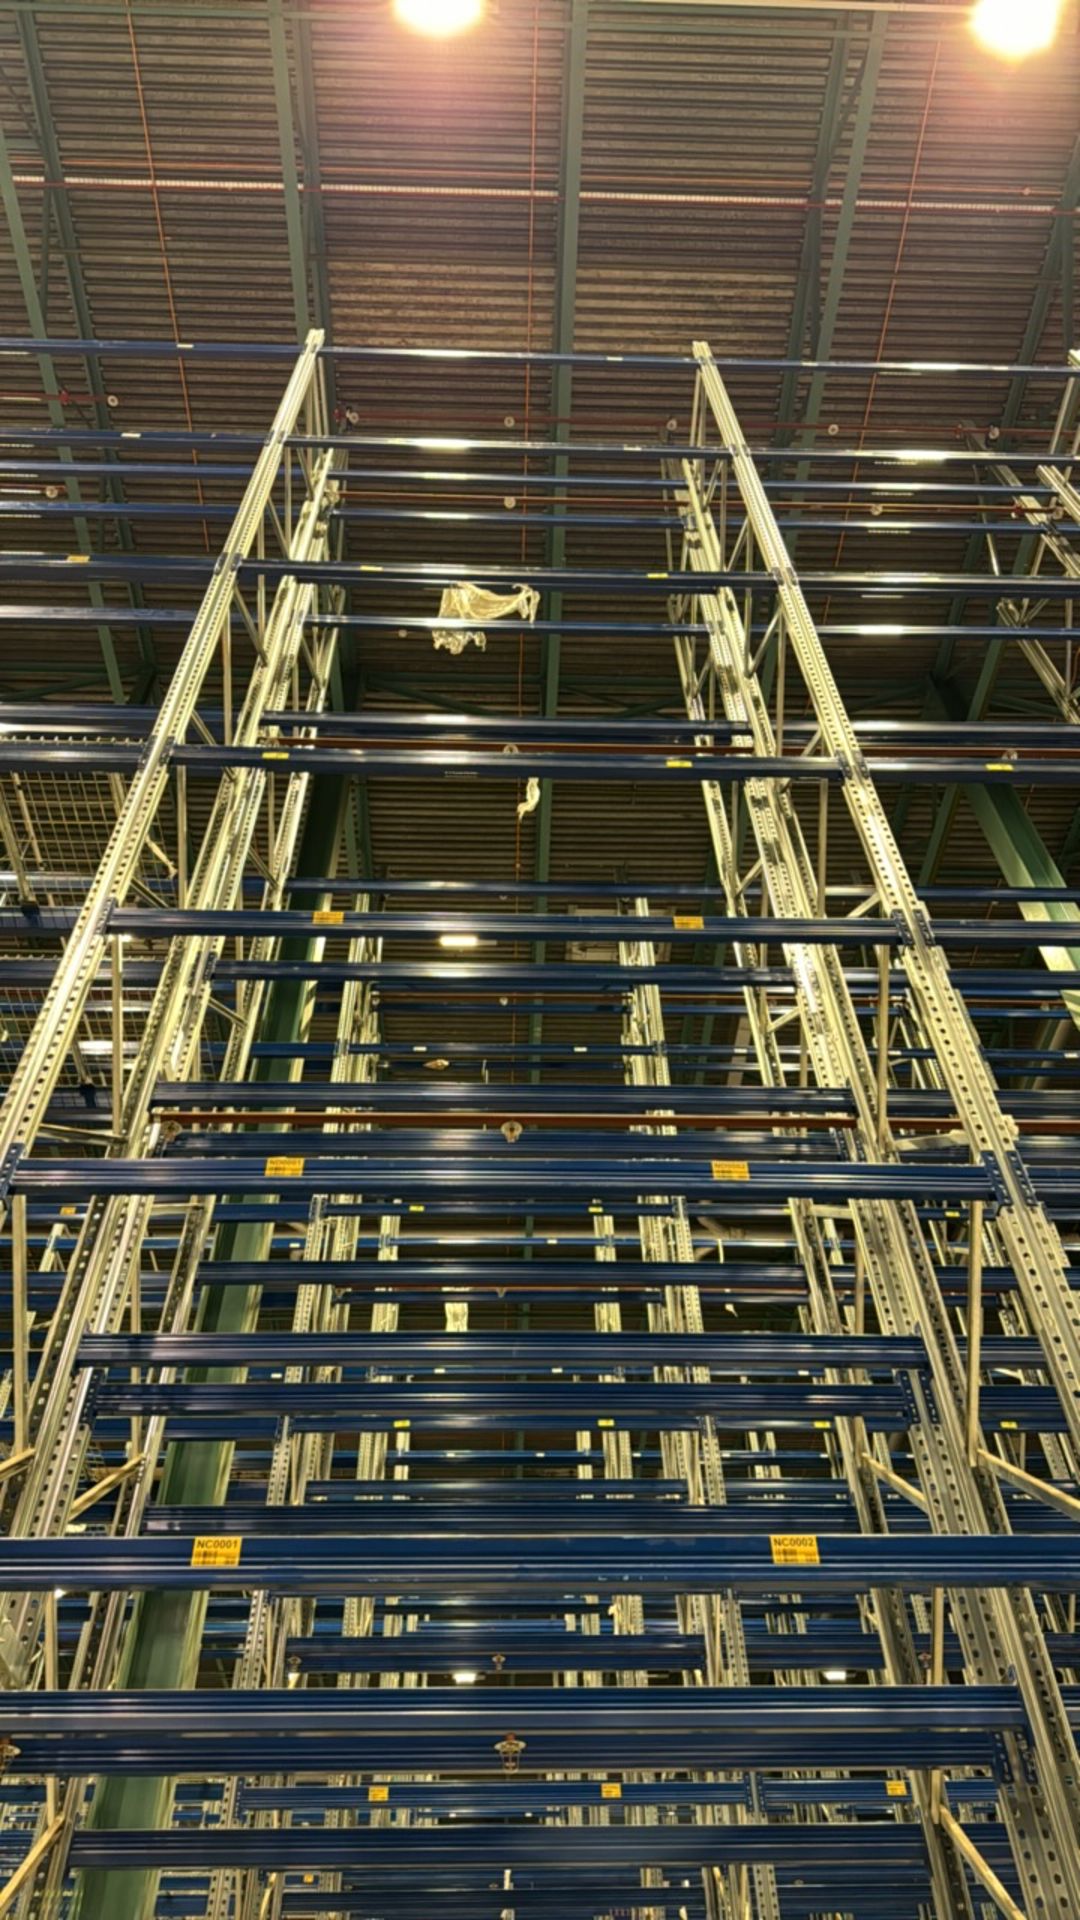 Run Of 32 Bays Of Back To Back Boltless Pallet Racking - Image 10 of 10